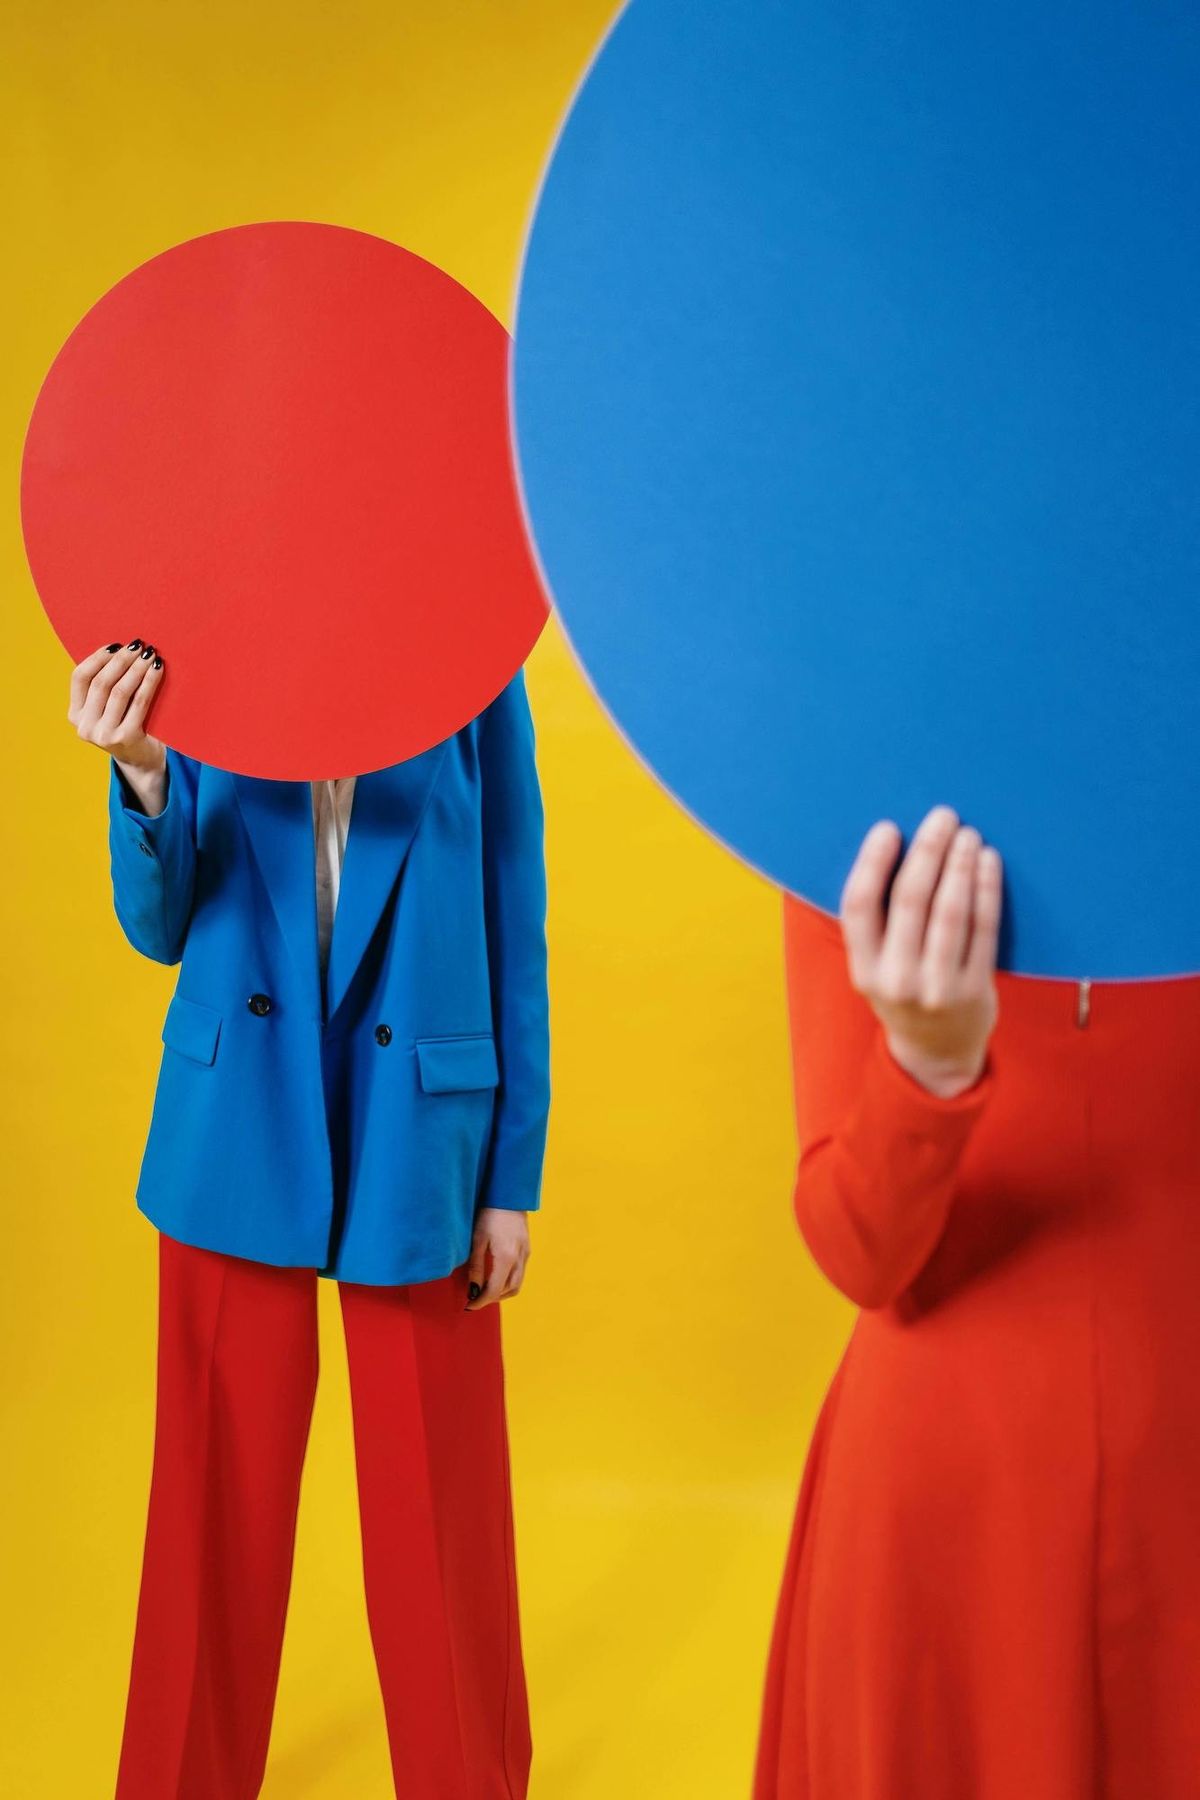 women in red pantsuit with blue blazer primary colors